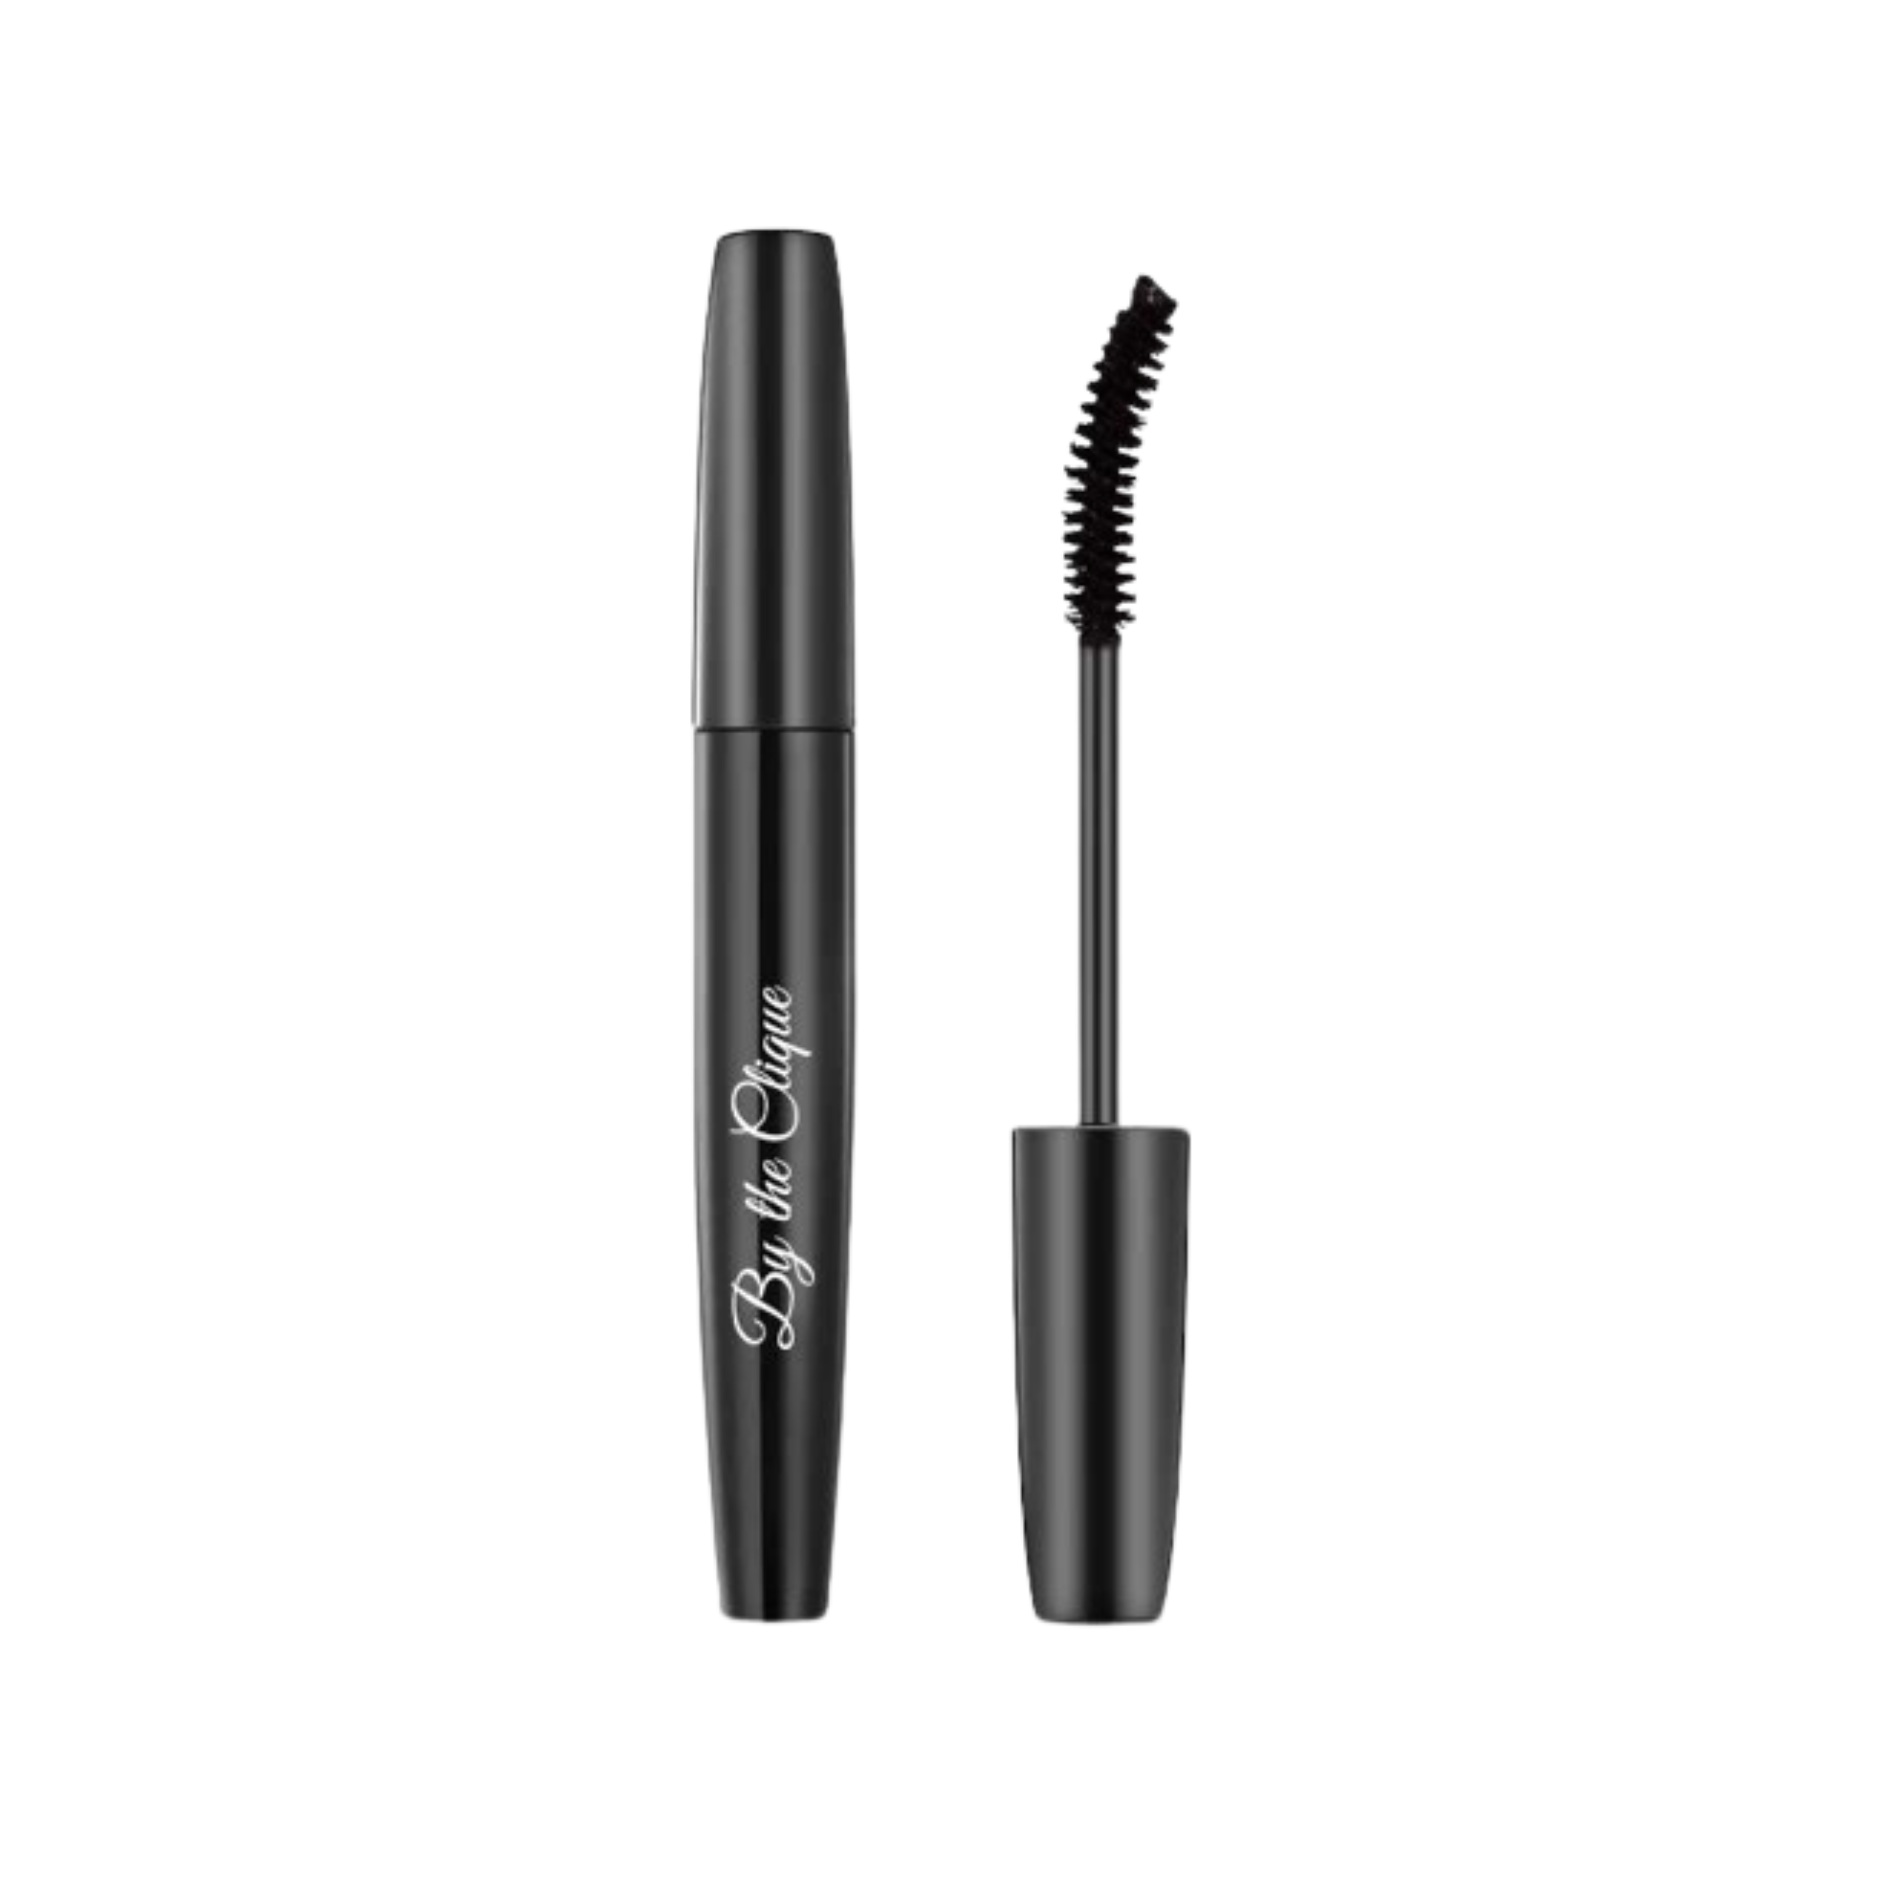 By The Clique Premium Lengthening Black Mascara | Smudge Proof - All Day Stay